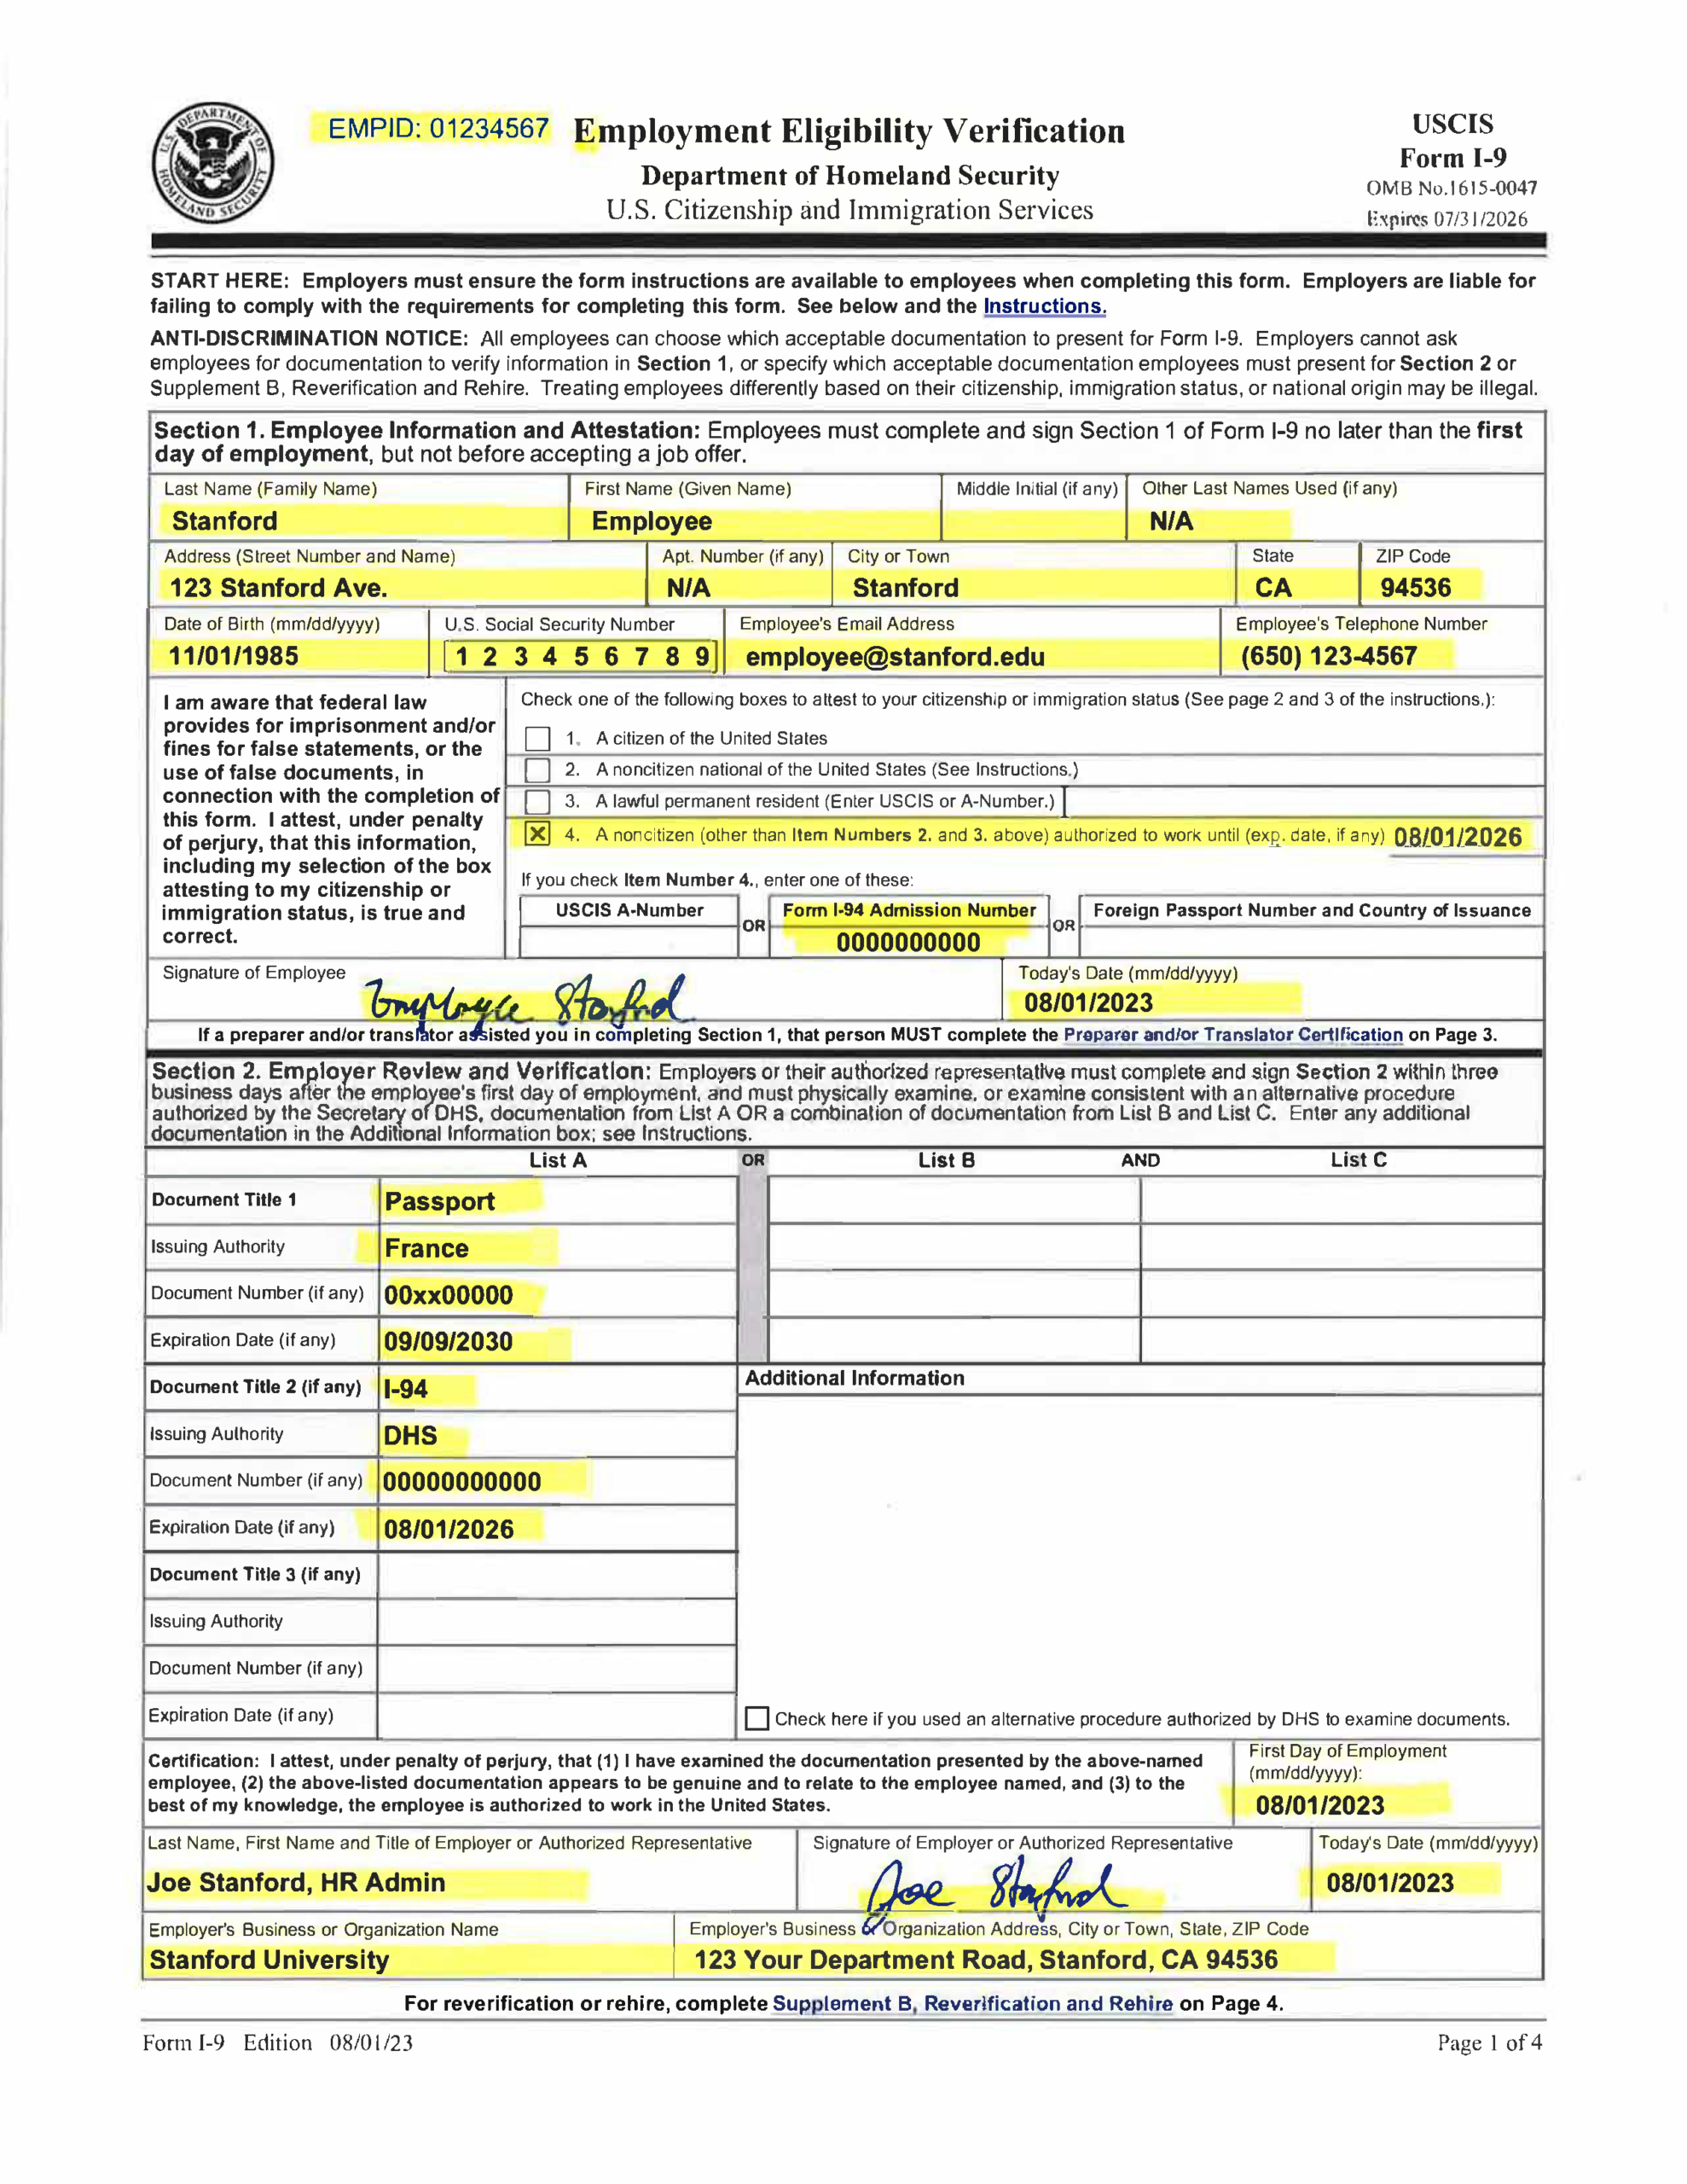 Examples Of Completed Form I-9 For Stanford in IRS I-9 Form